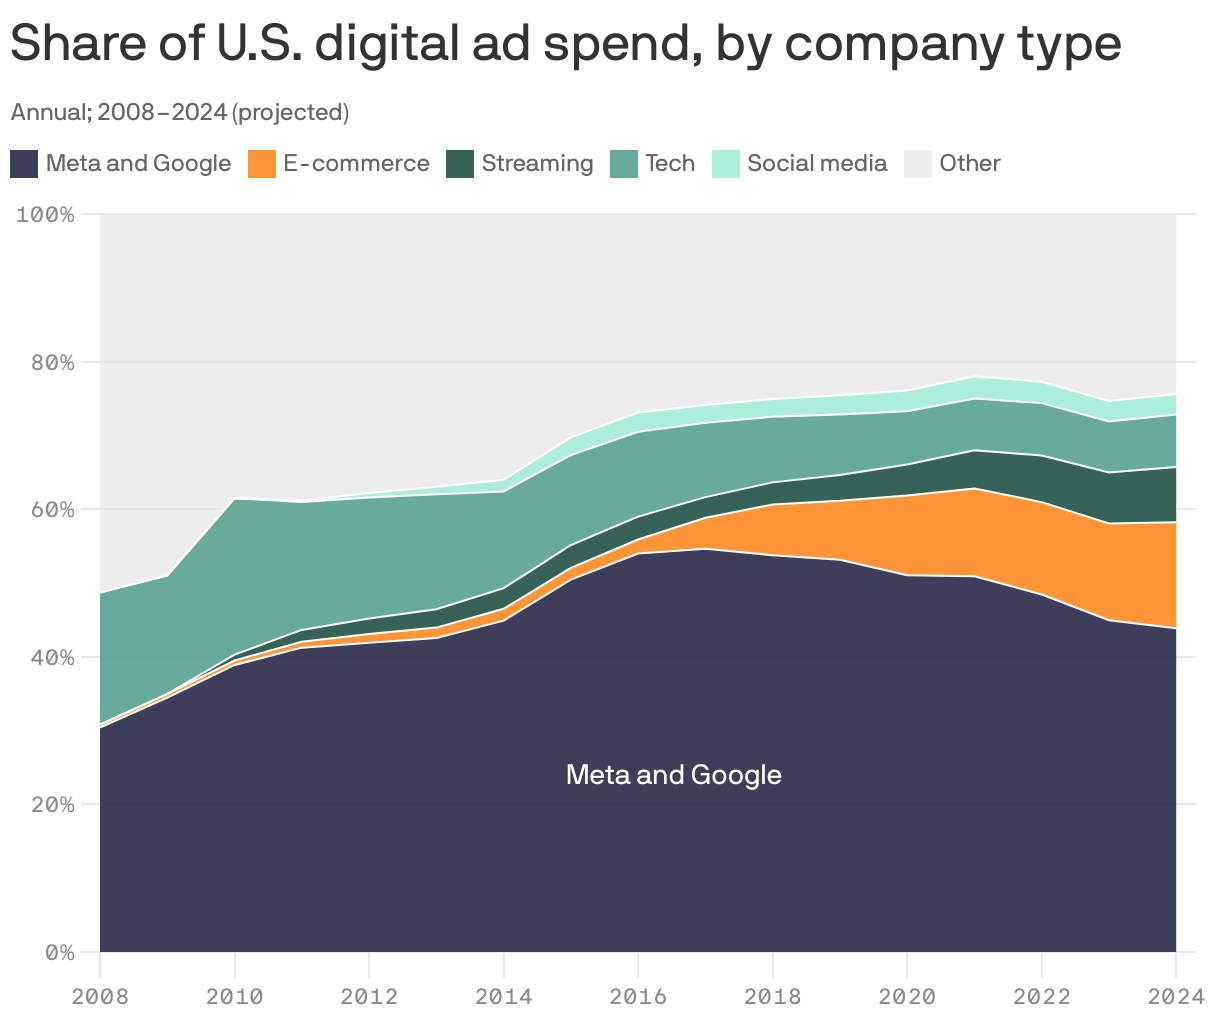 Share of U.S. digital ad spend, by company type